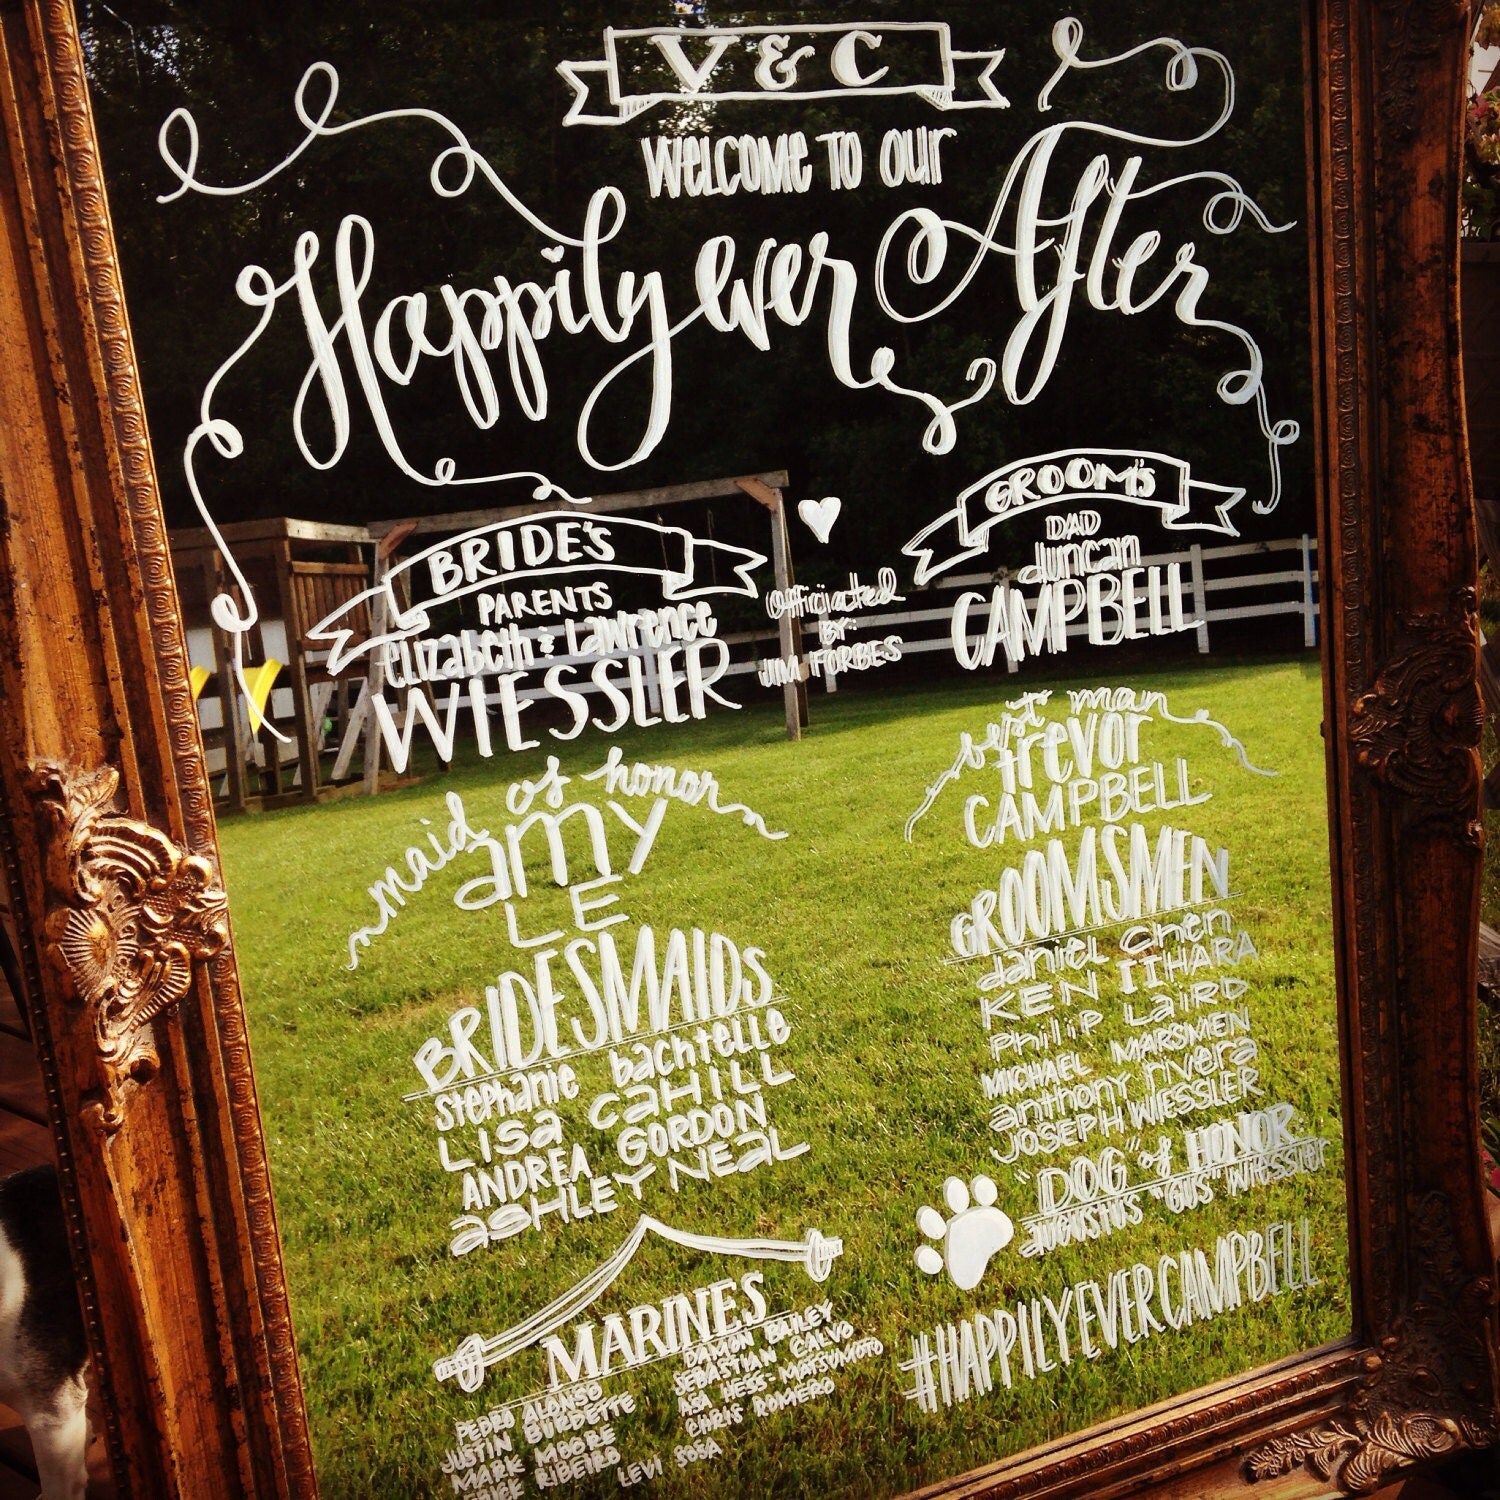 How To Create Wedding Programs At Home